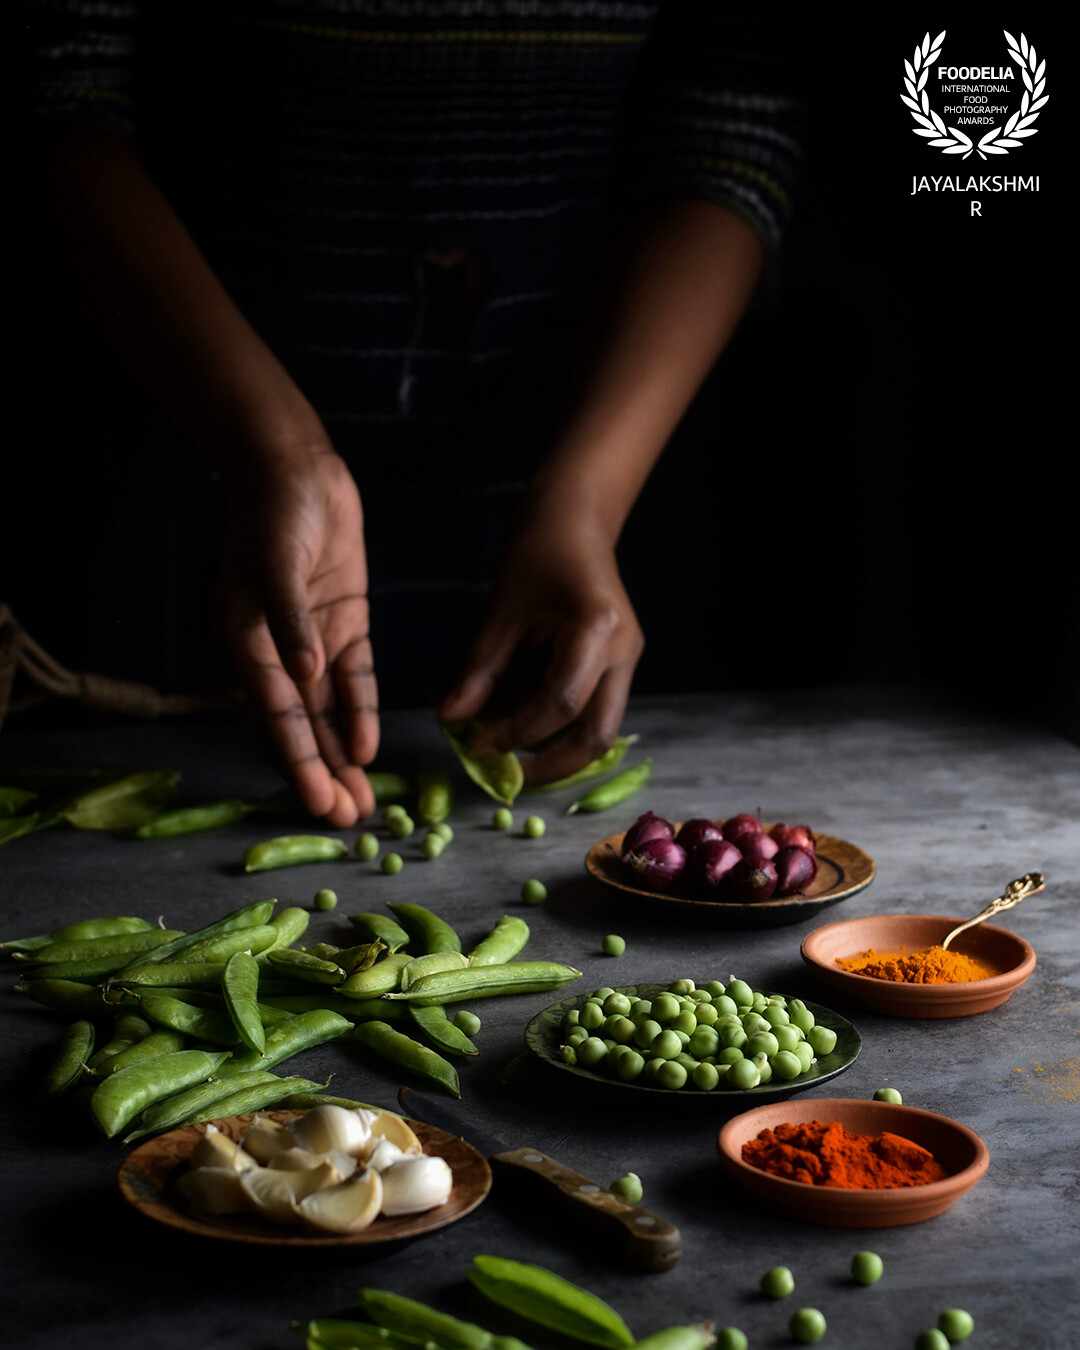 A typical kitchen scene .  Shelling out fresh green peas , included our regular spices for a bit of contrast in the frame .